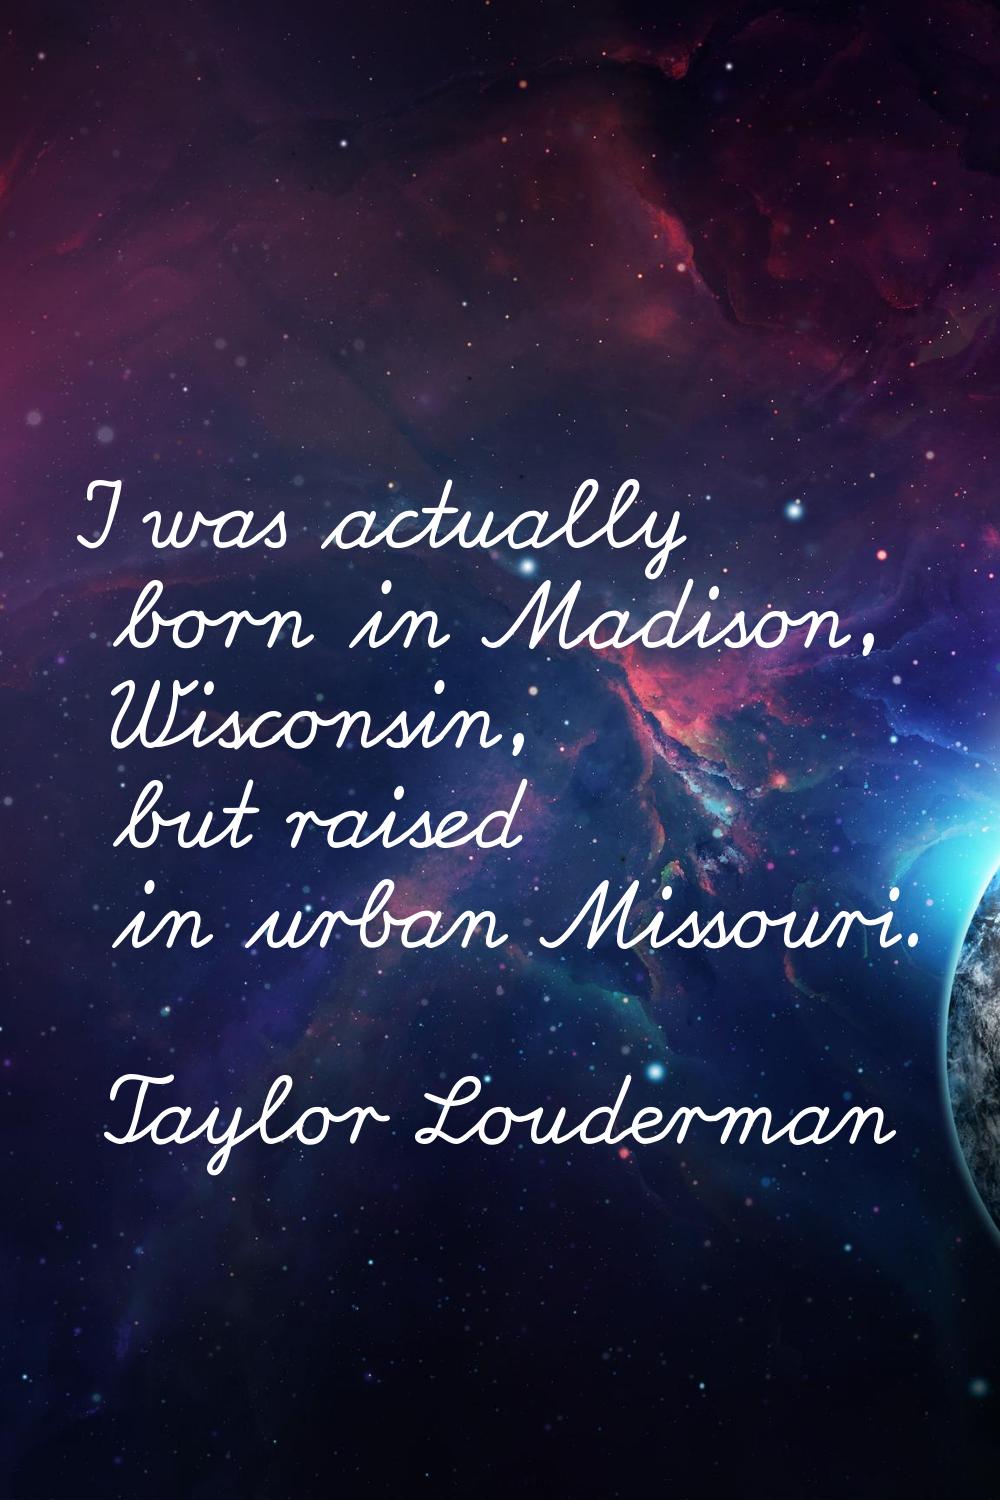 I was actually born in Madison, Wisconsin, but raised in urban Missouri.